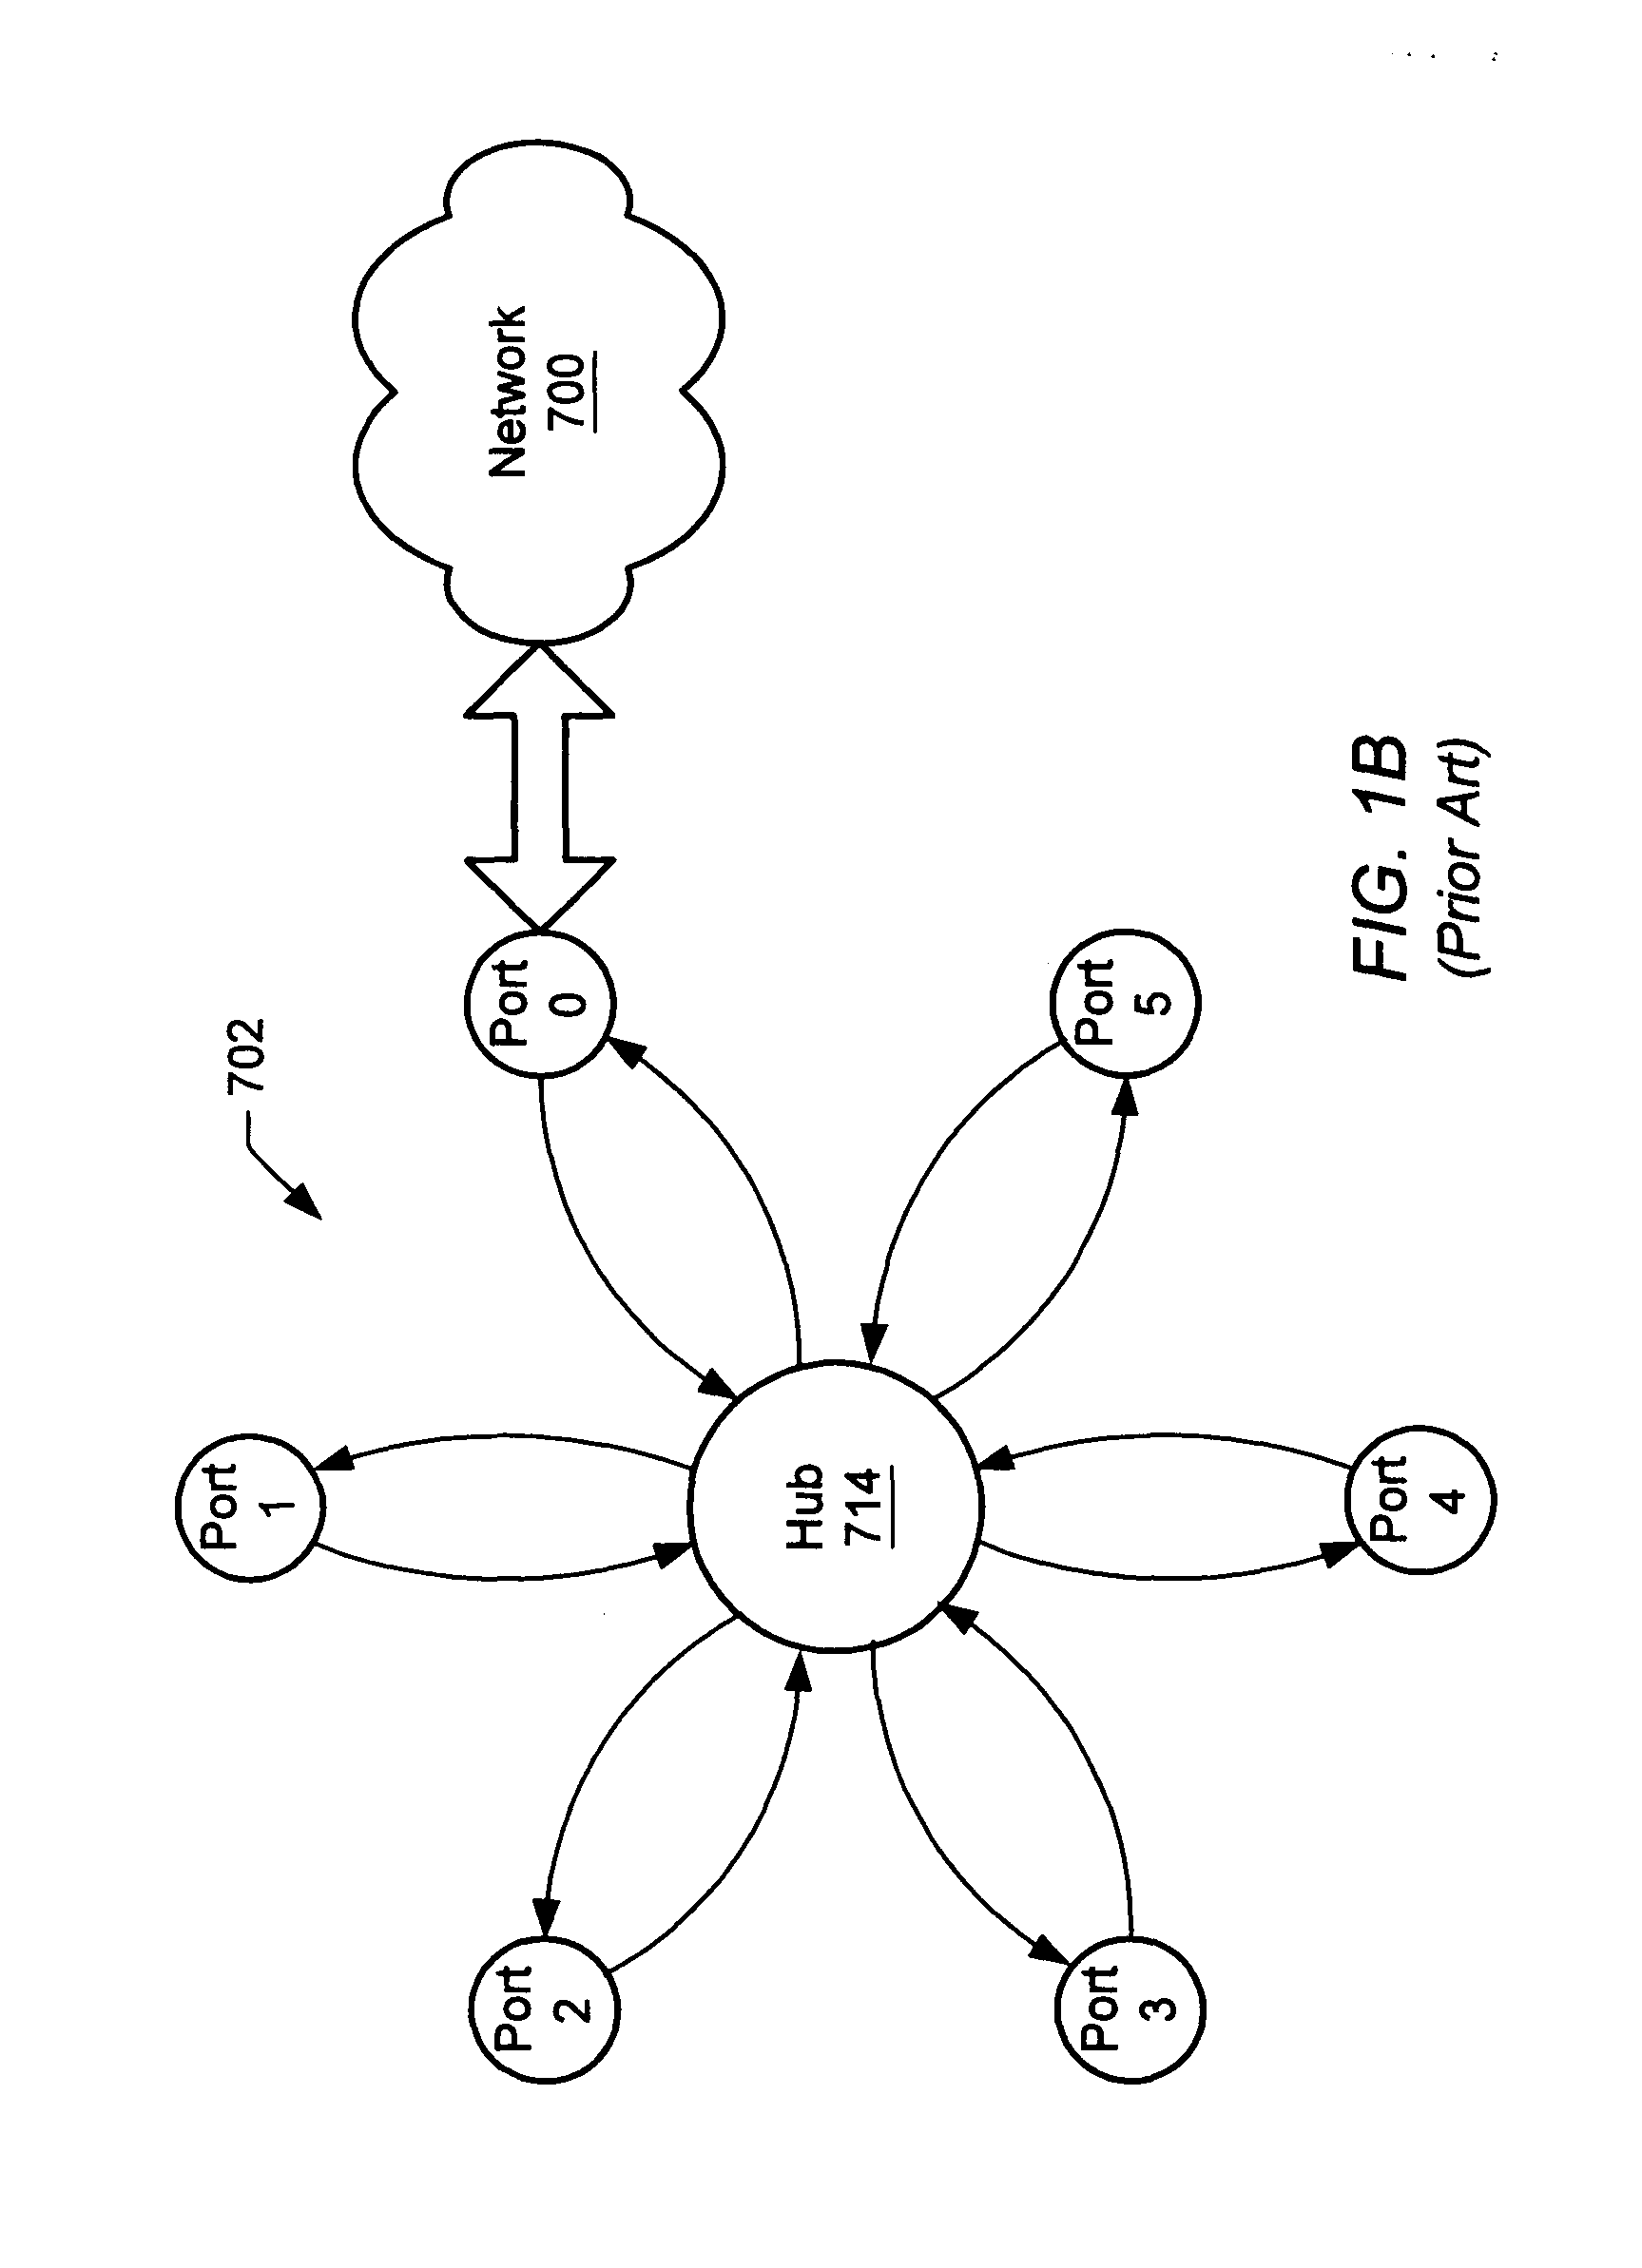 High jitter scheduling of interleaved frames in an arbitrated loop